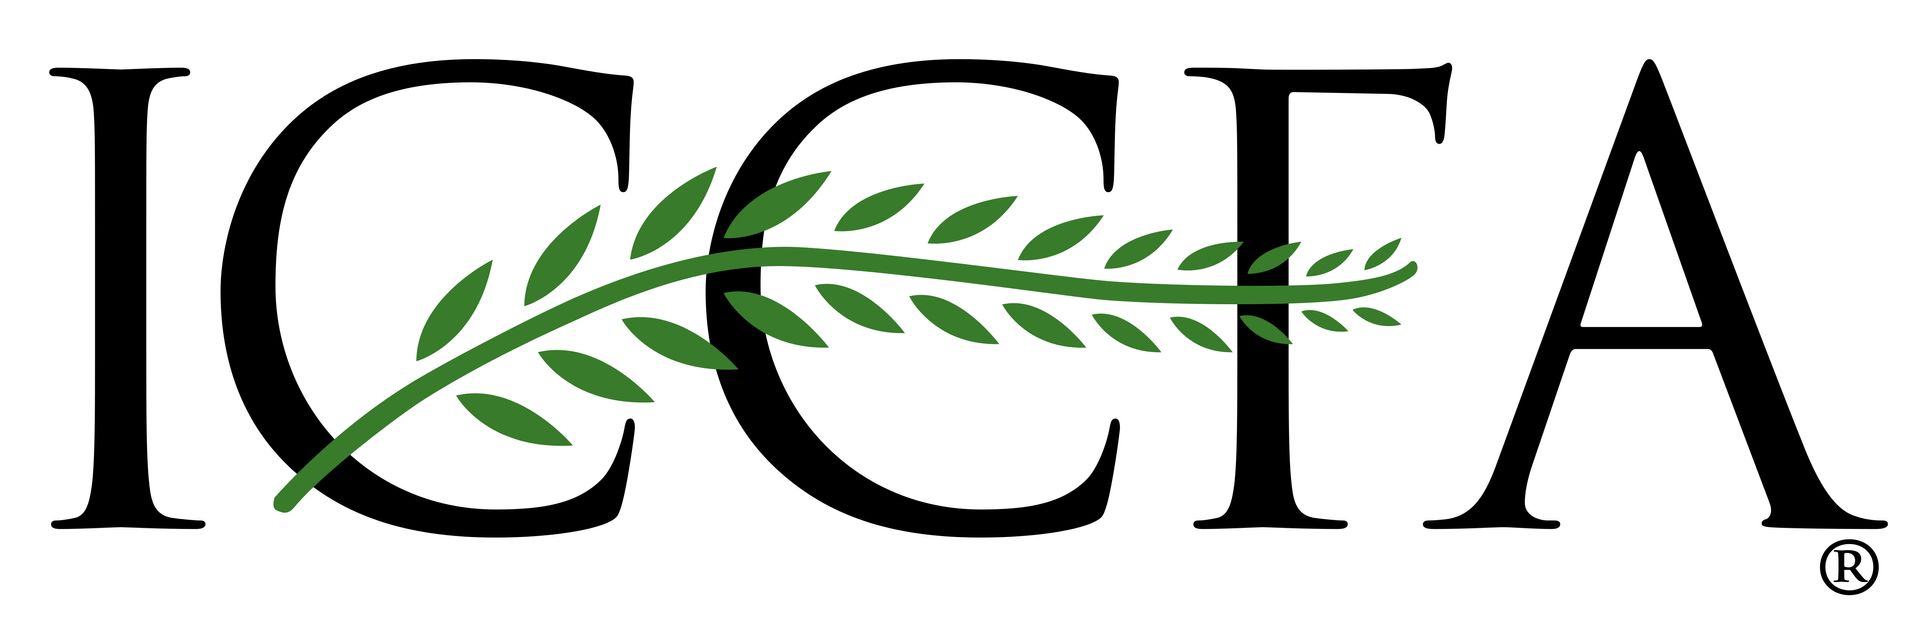 a black and white logo for icca with a green leaf